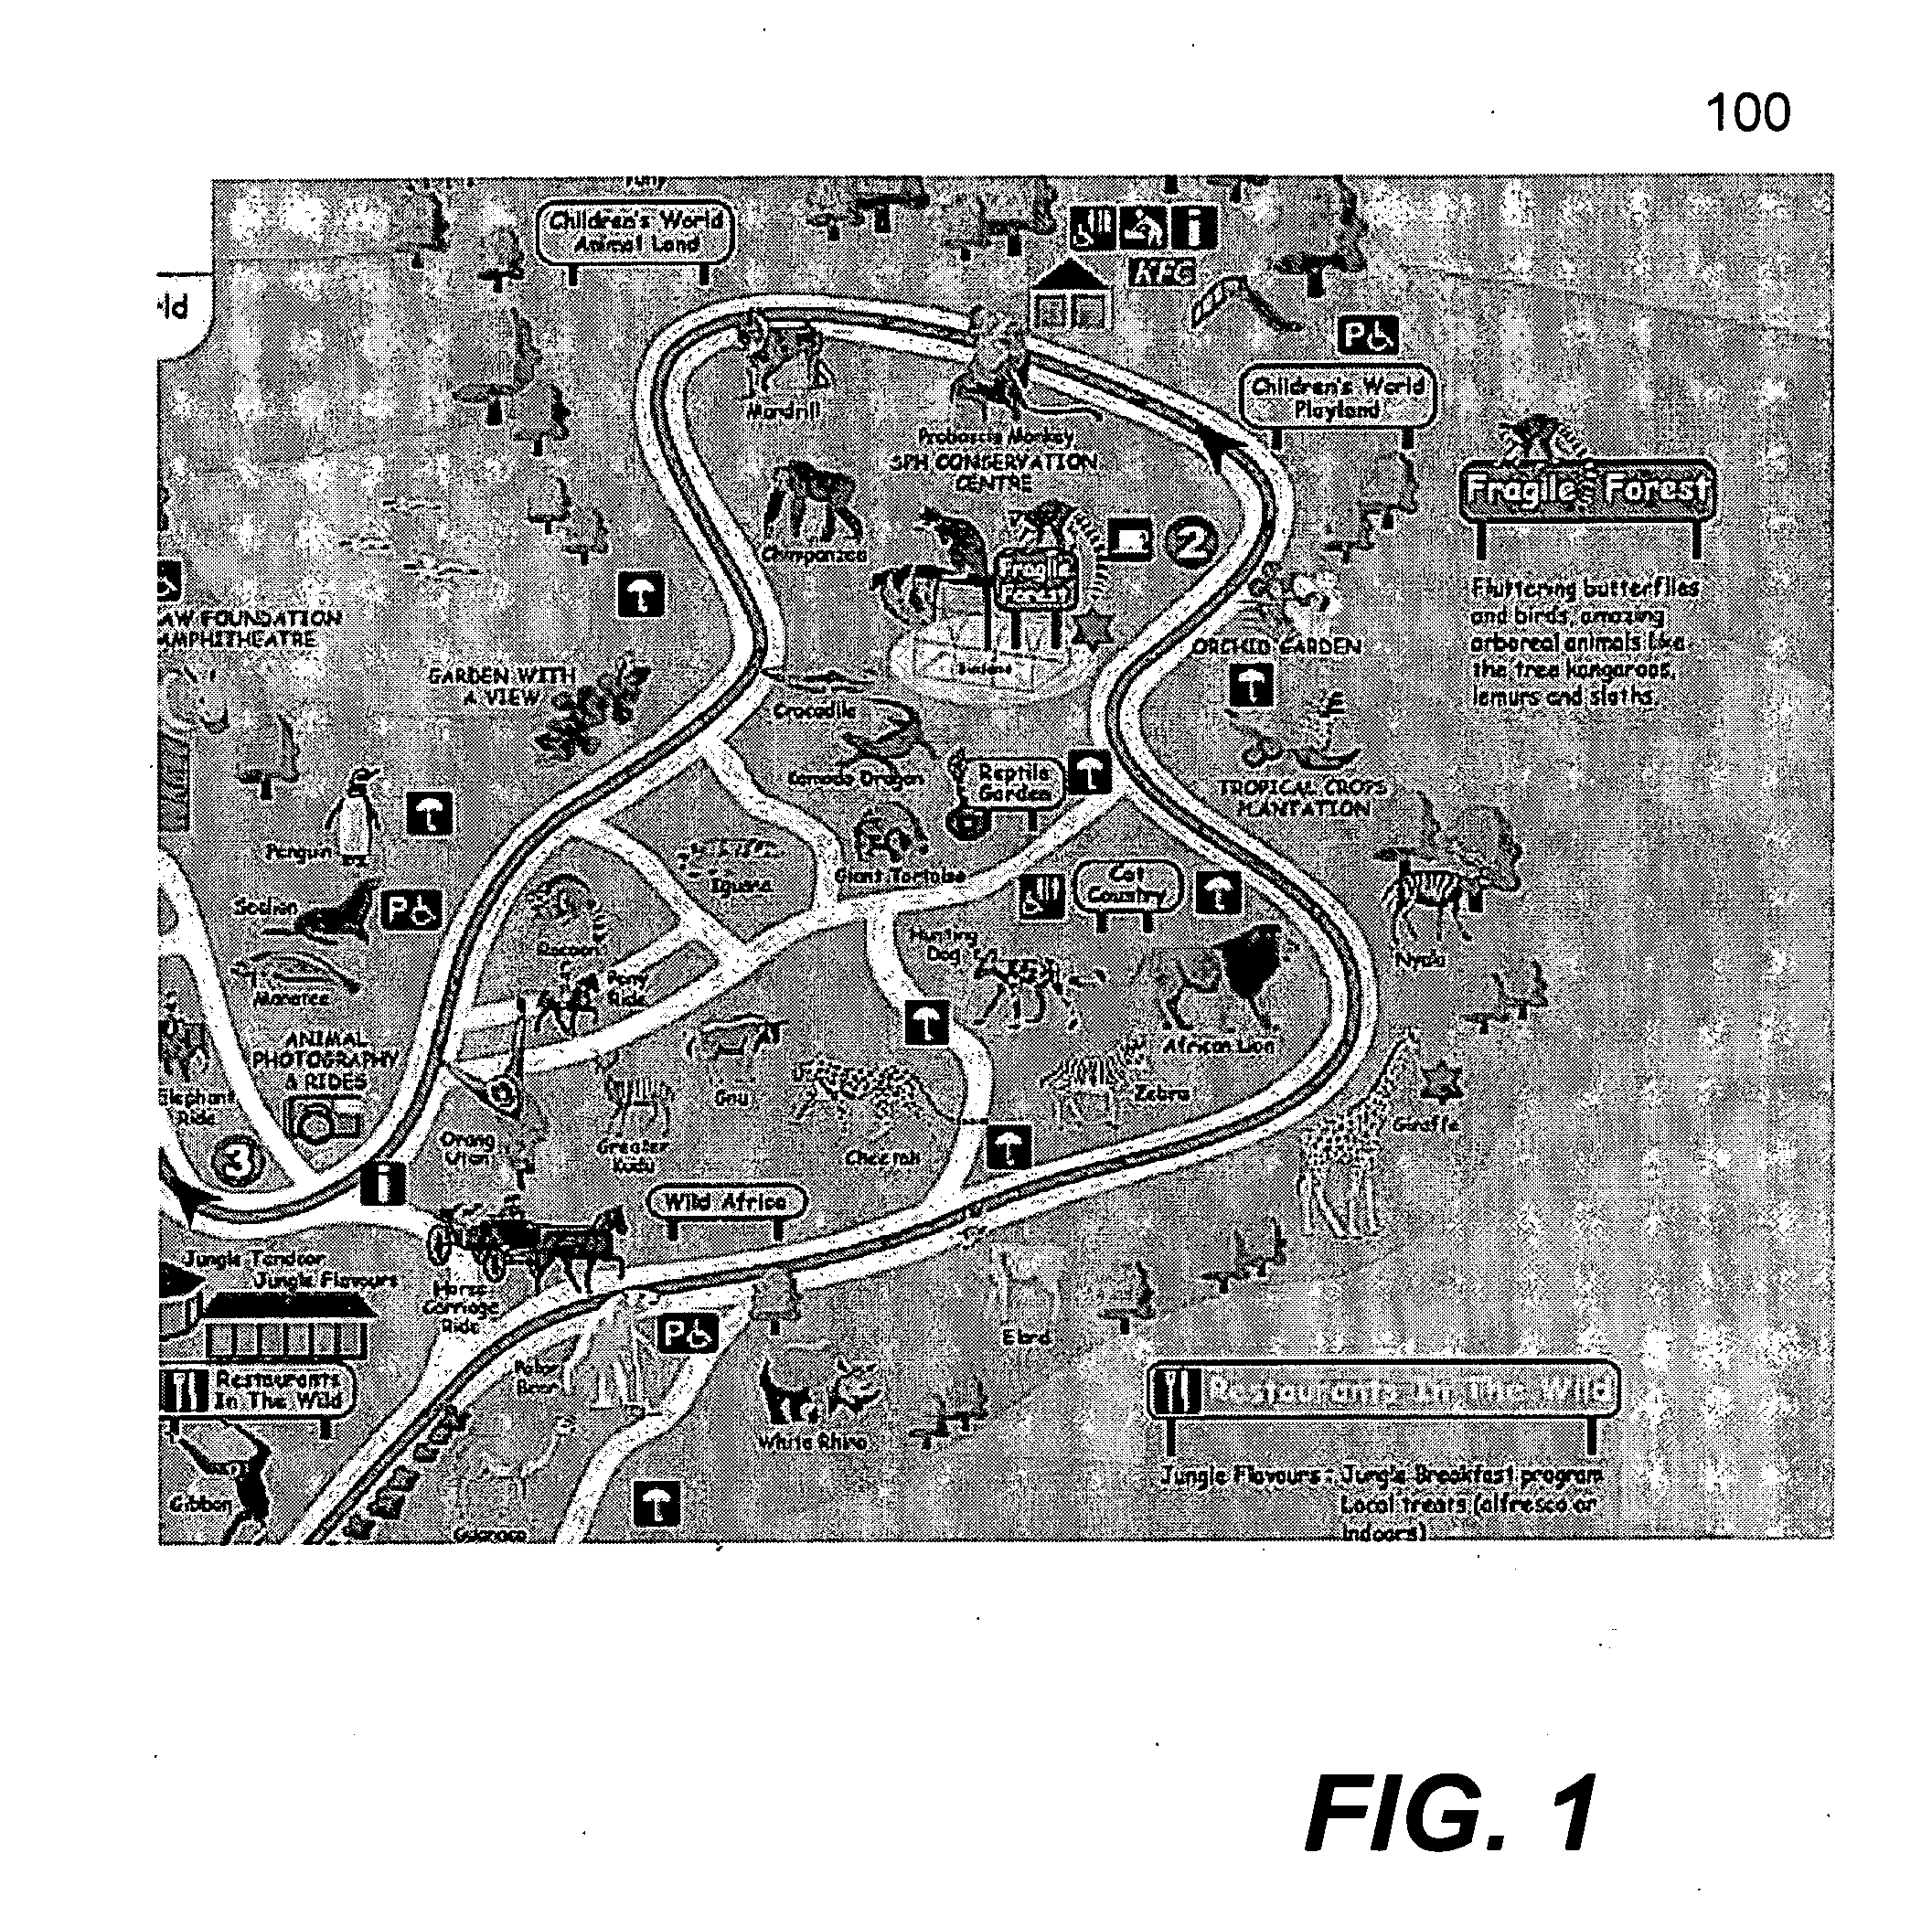 Method and apparatus for navigating on artistic maps